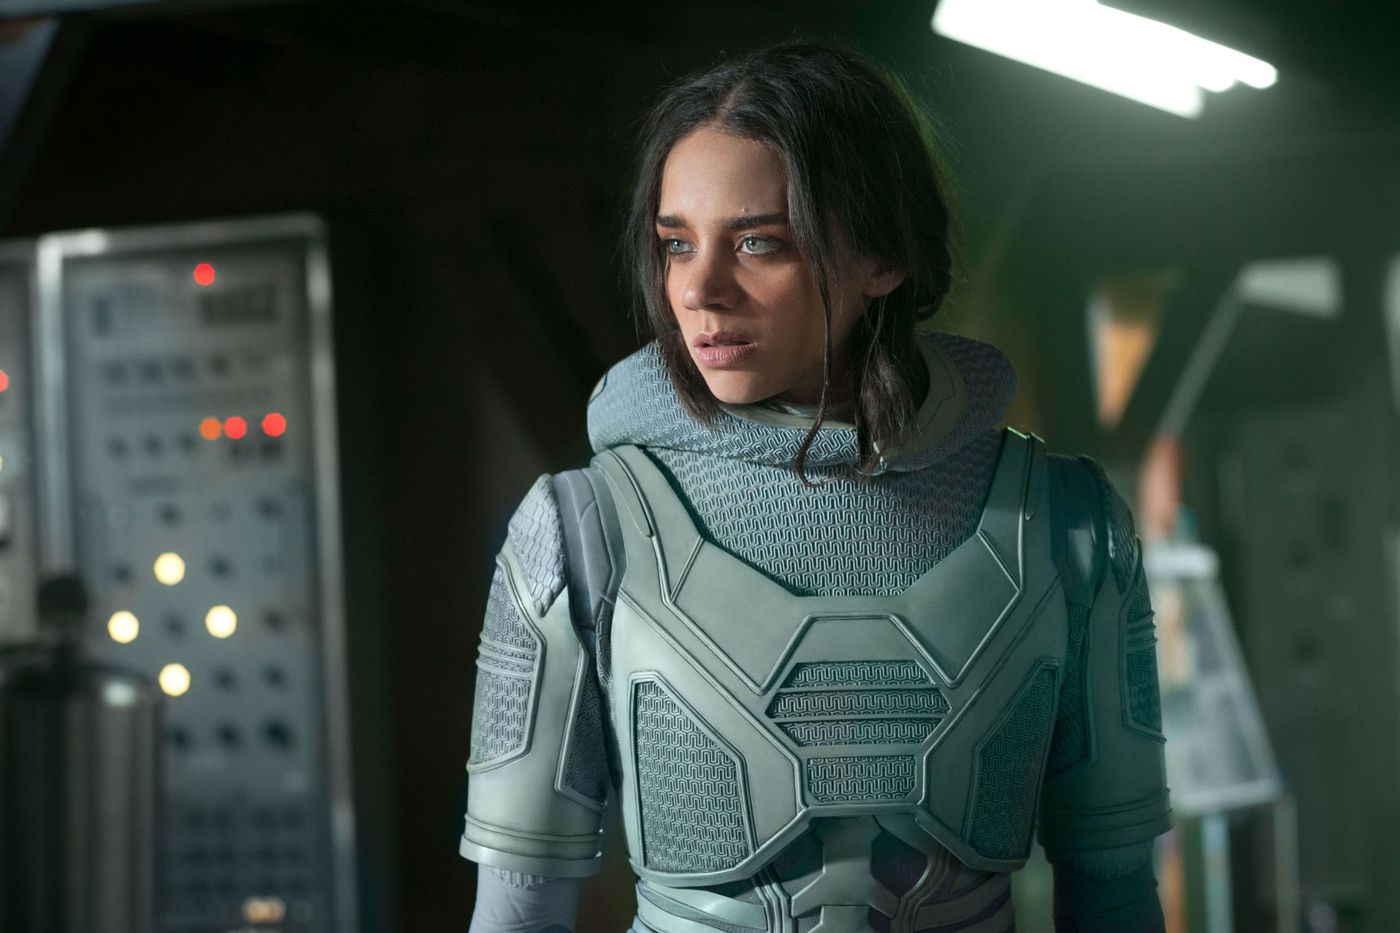 Ant-Man and the Wasp' Disappointing Villains Break Marvel's Streak